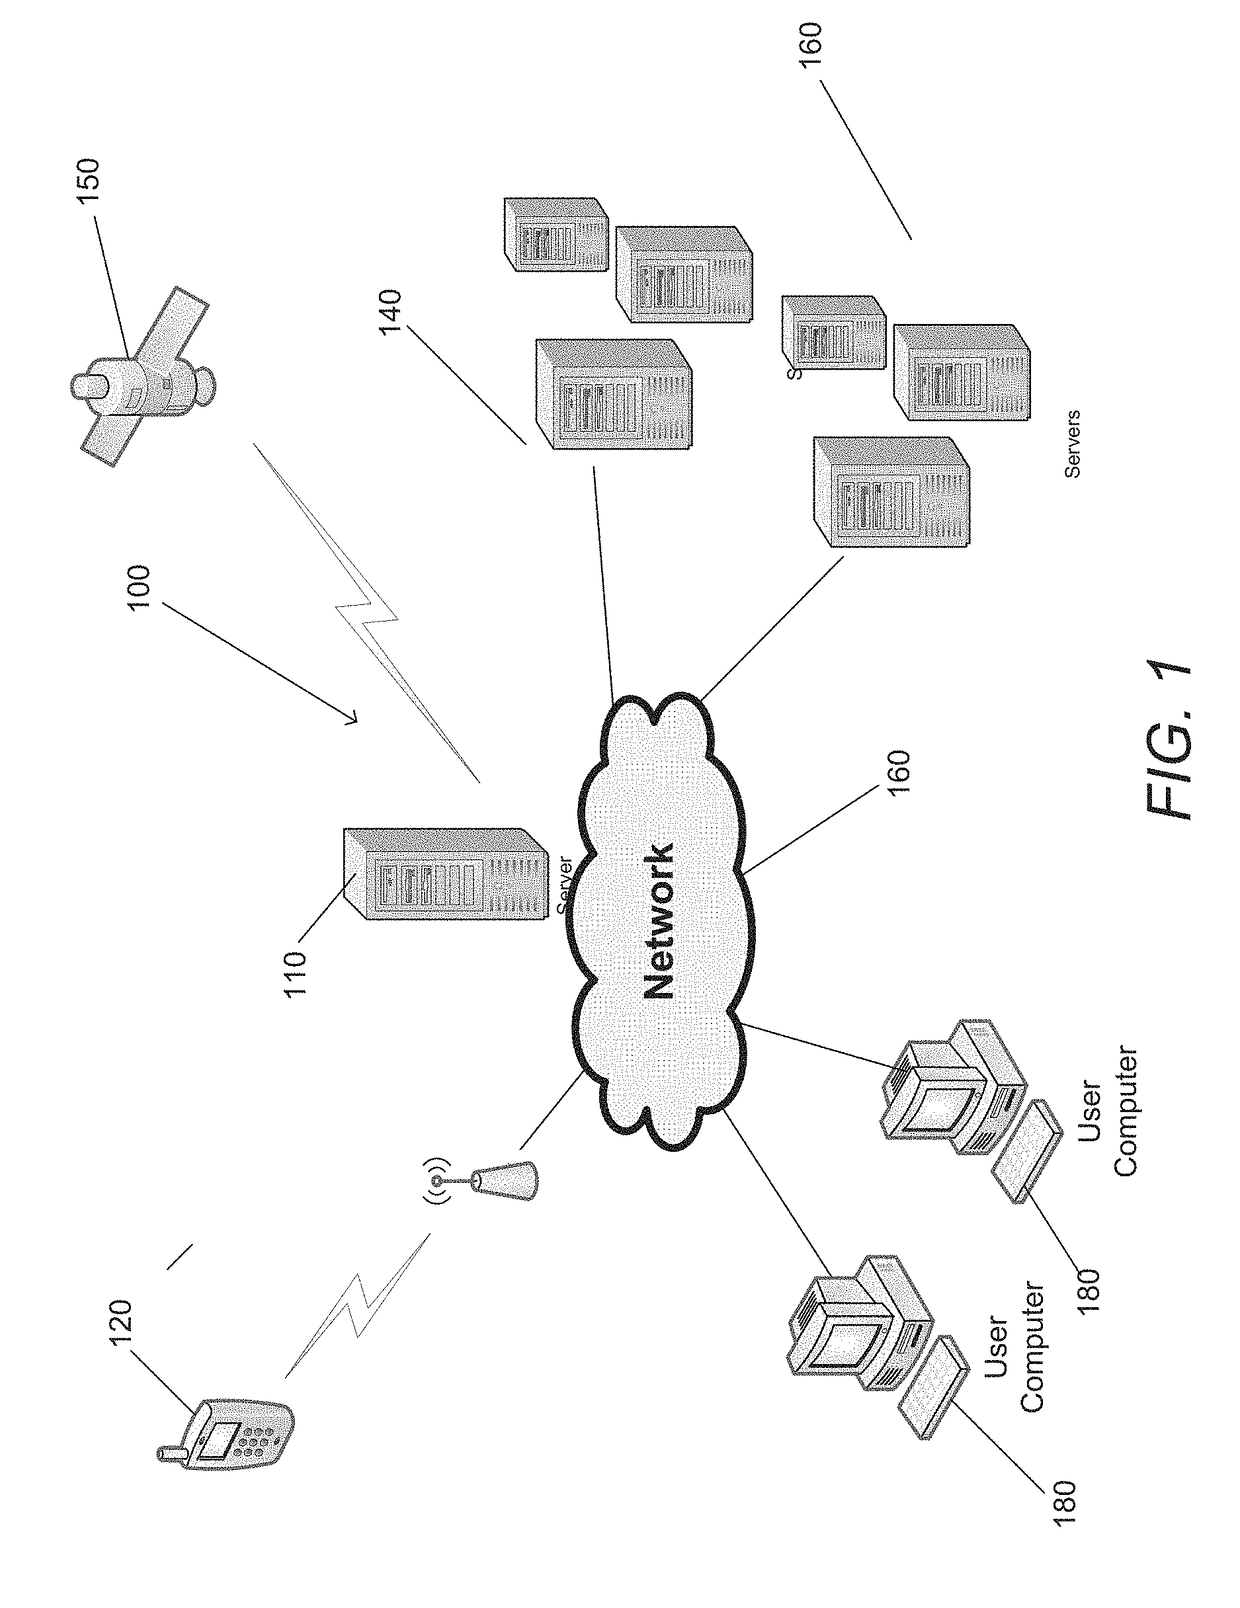 Systems and methods for satellite image processing to estimate crop yield